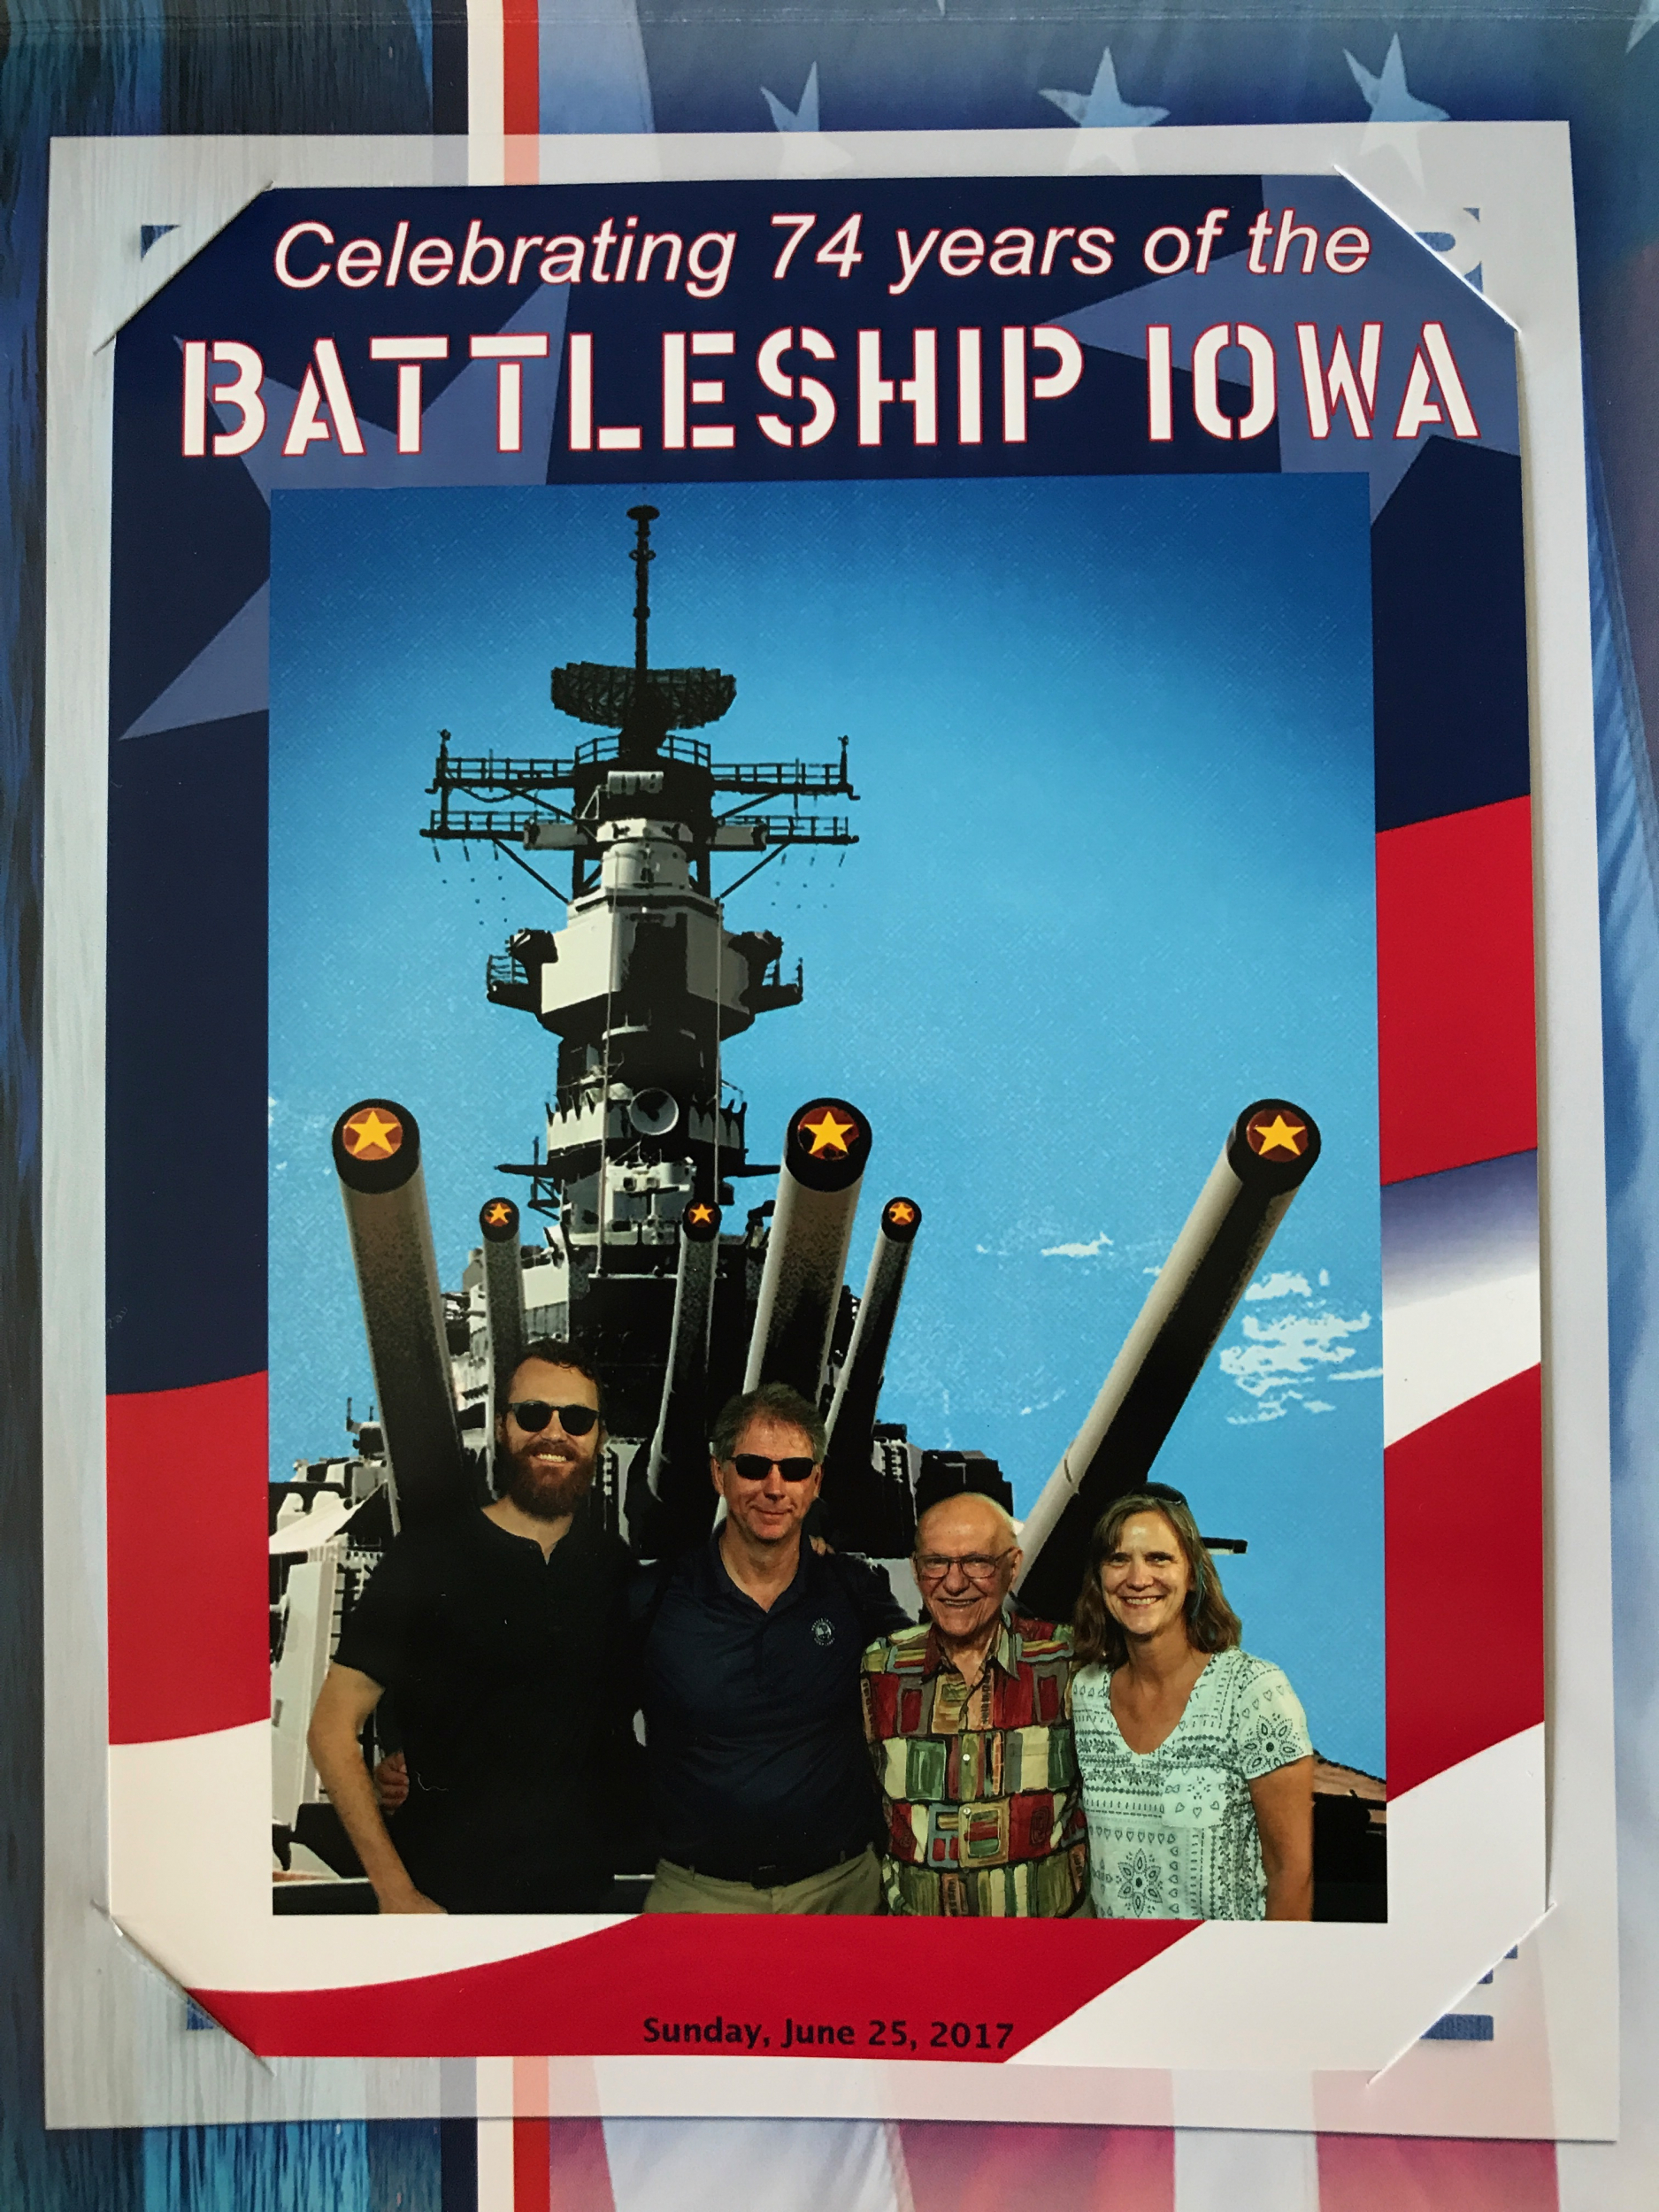 7. Fathers day visit to the USS IOWA, the battleship Dad served on in WWII